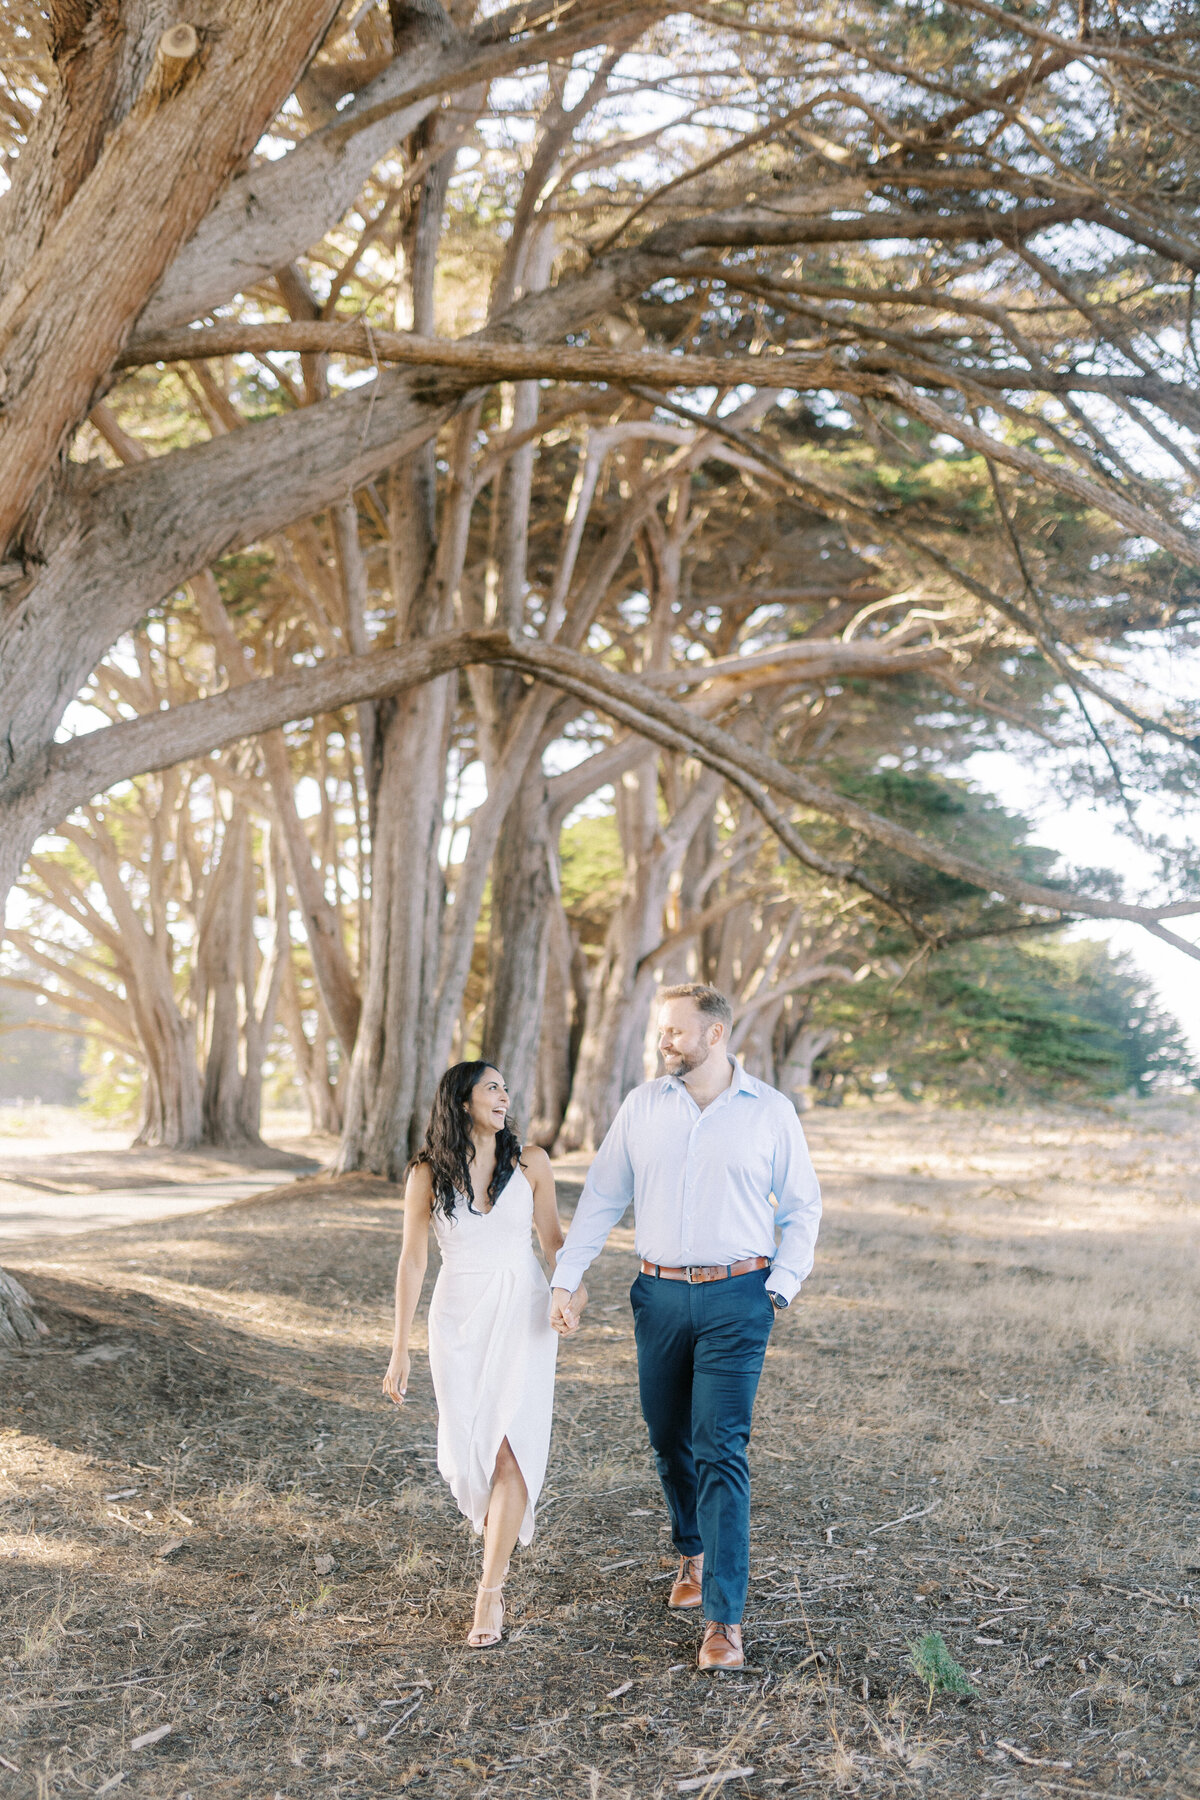 Shawn and Lisa | Photographer Favs | Cypress Tree Tunnel Engagement Session | Point Reyes, Ca-8